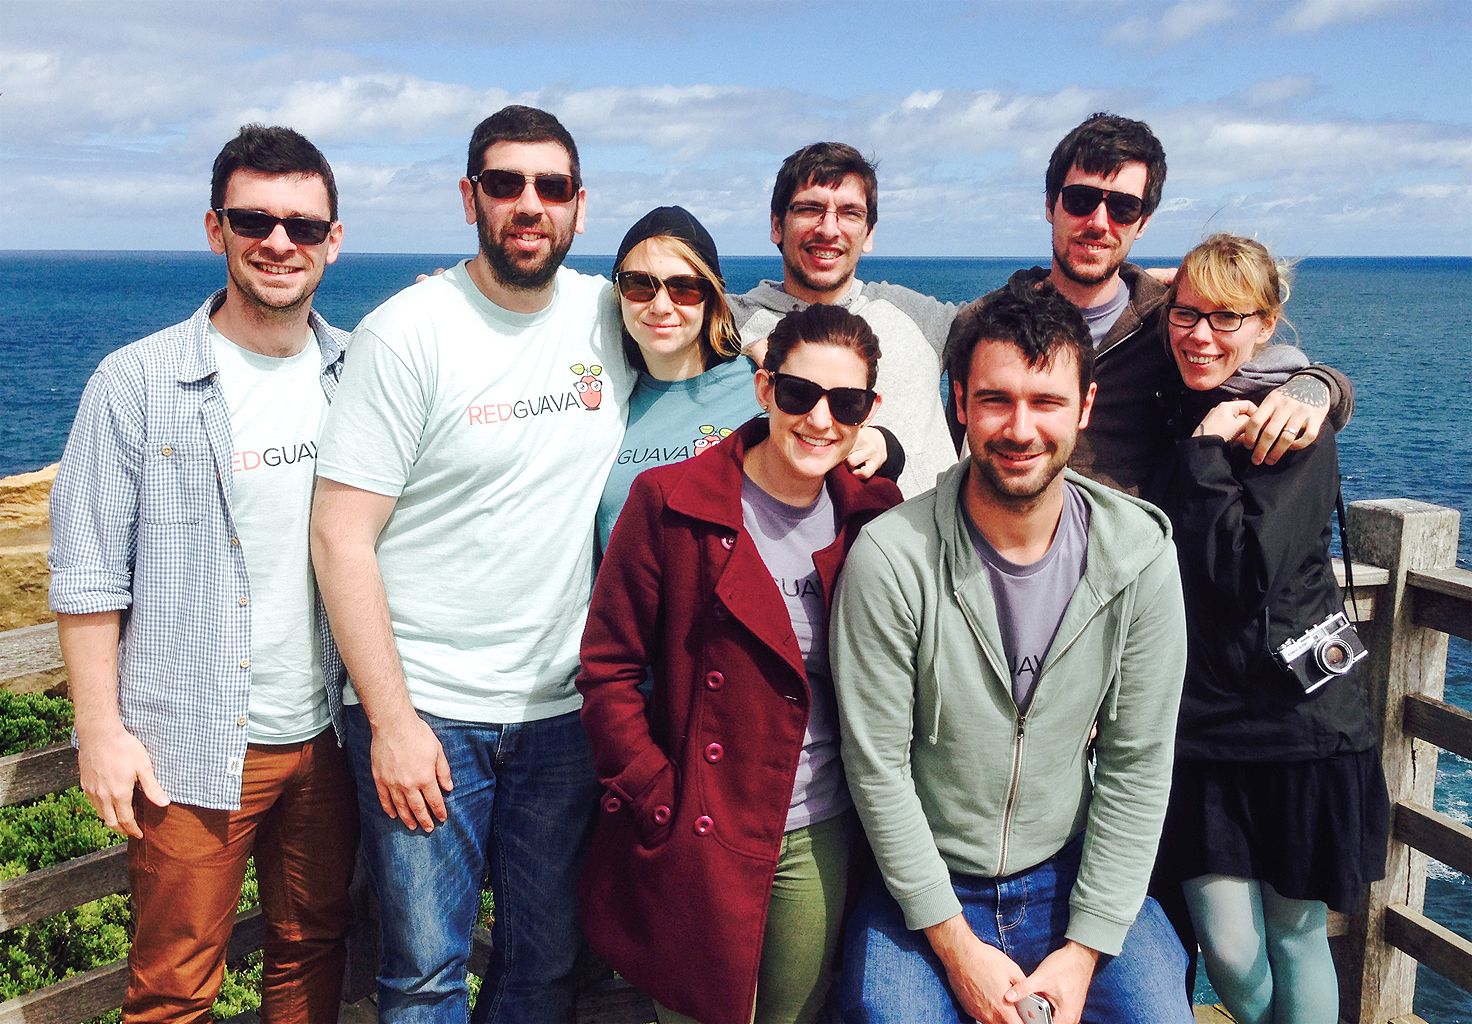 A group photo of members of the Cliniko team during a trip to Apollo Bay, Australia.